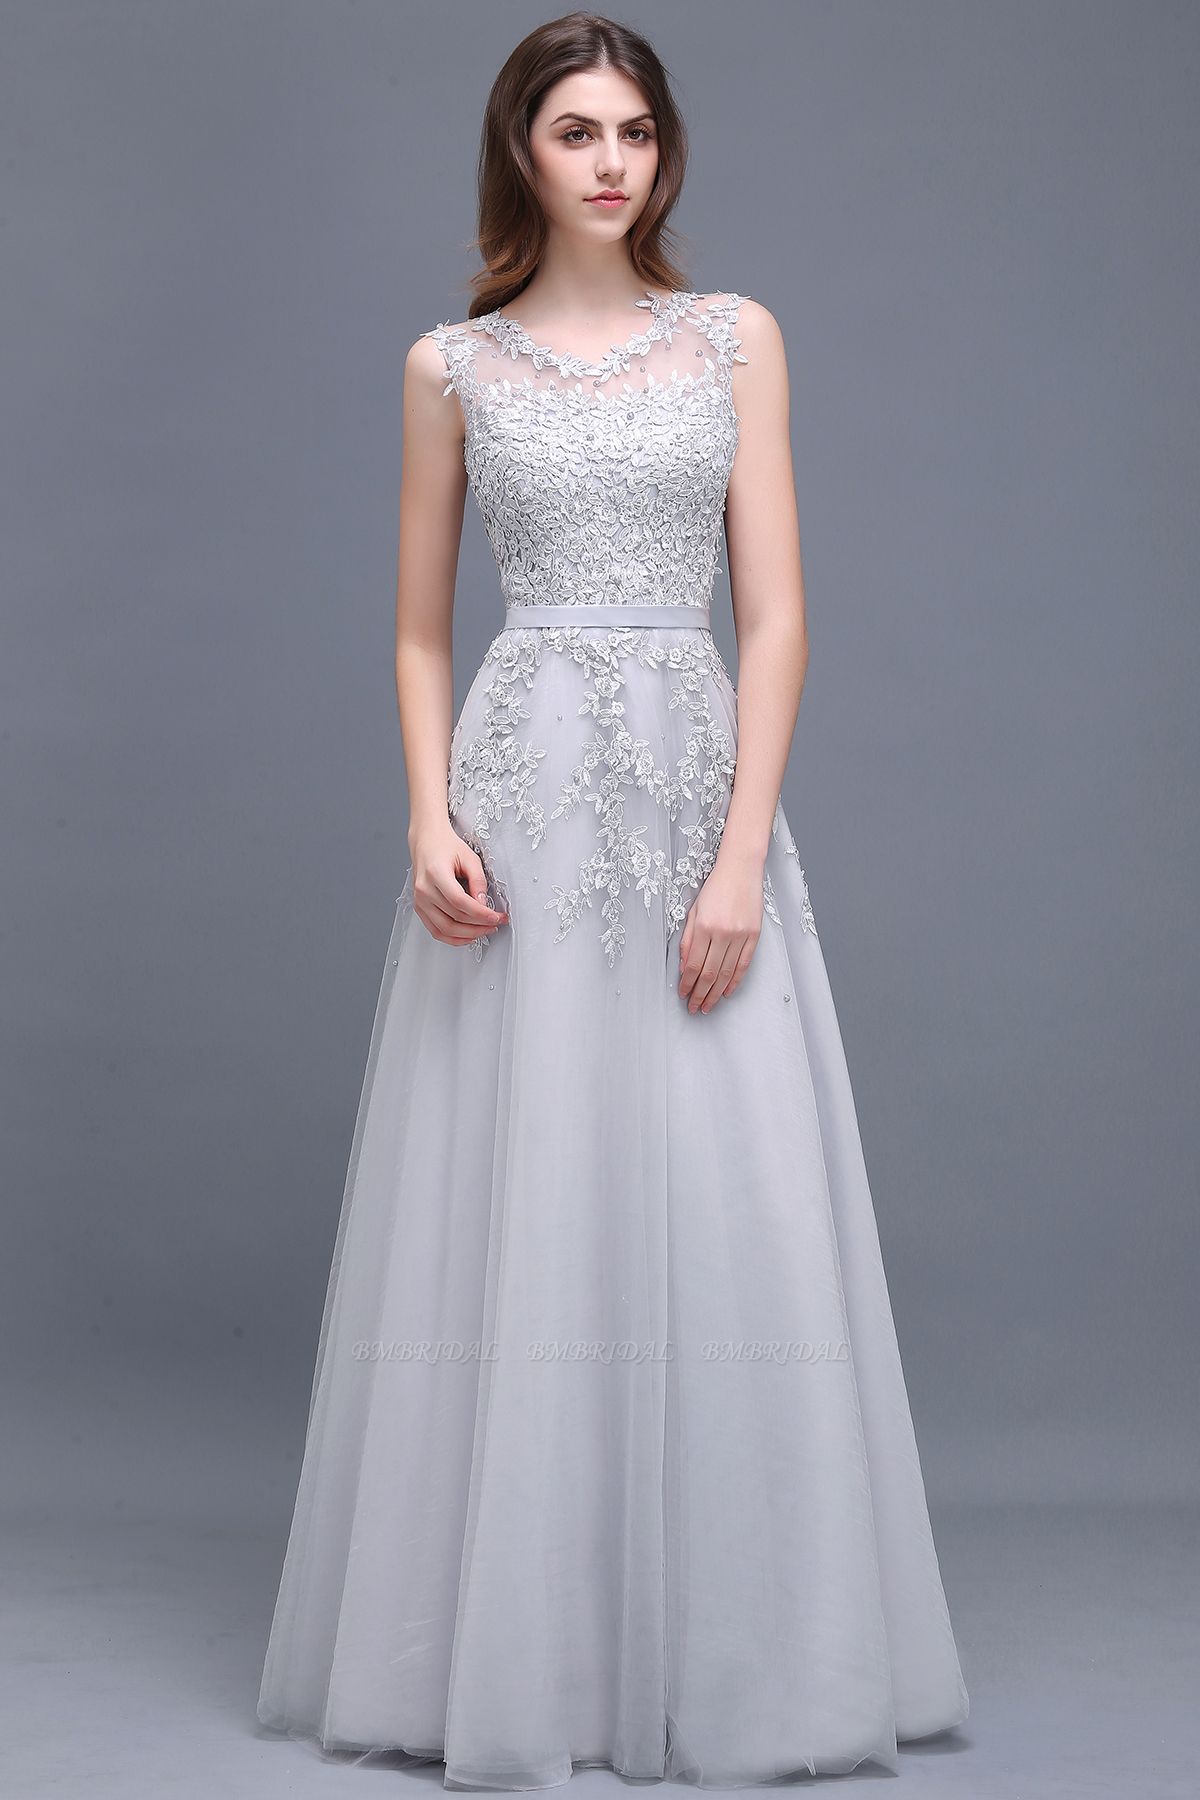 BMbridal A-line Floor-length Tulle Prom Dress with Appliques